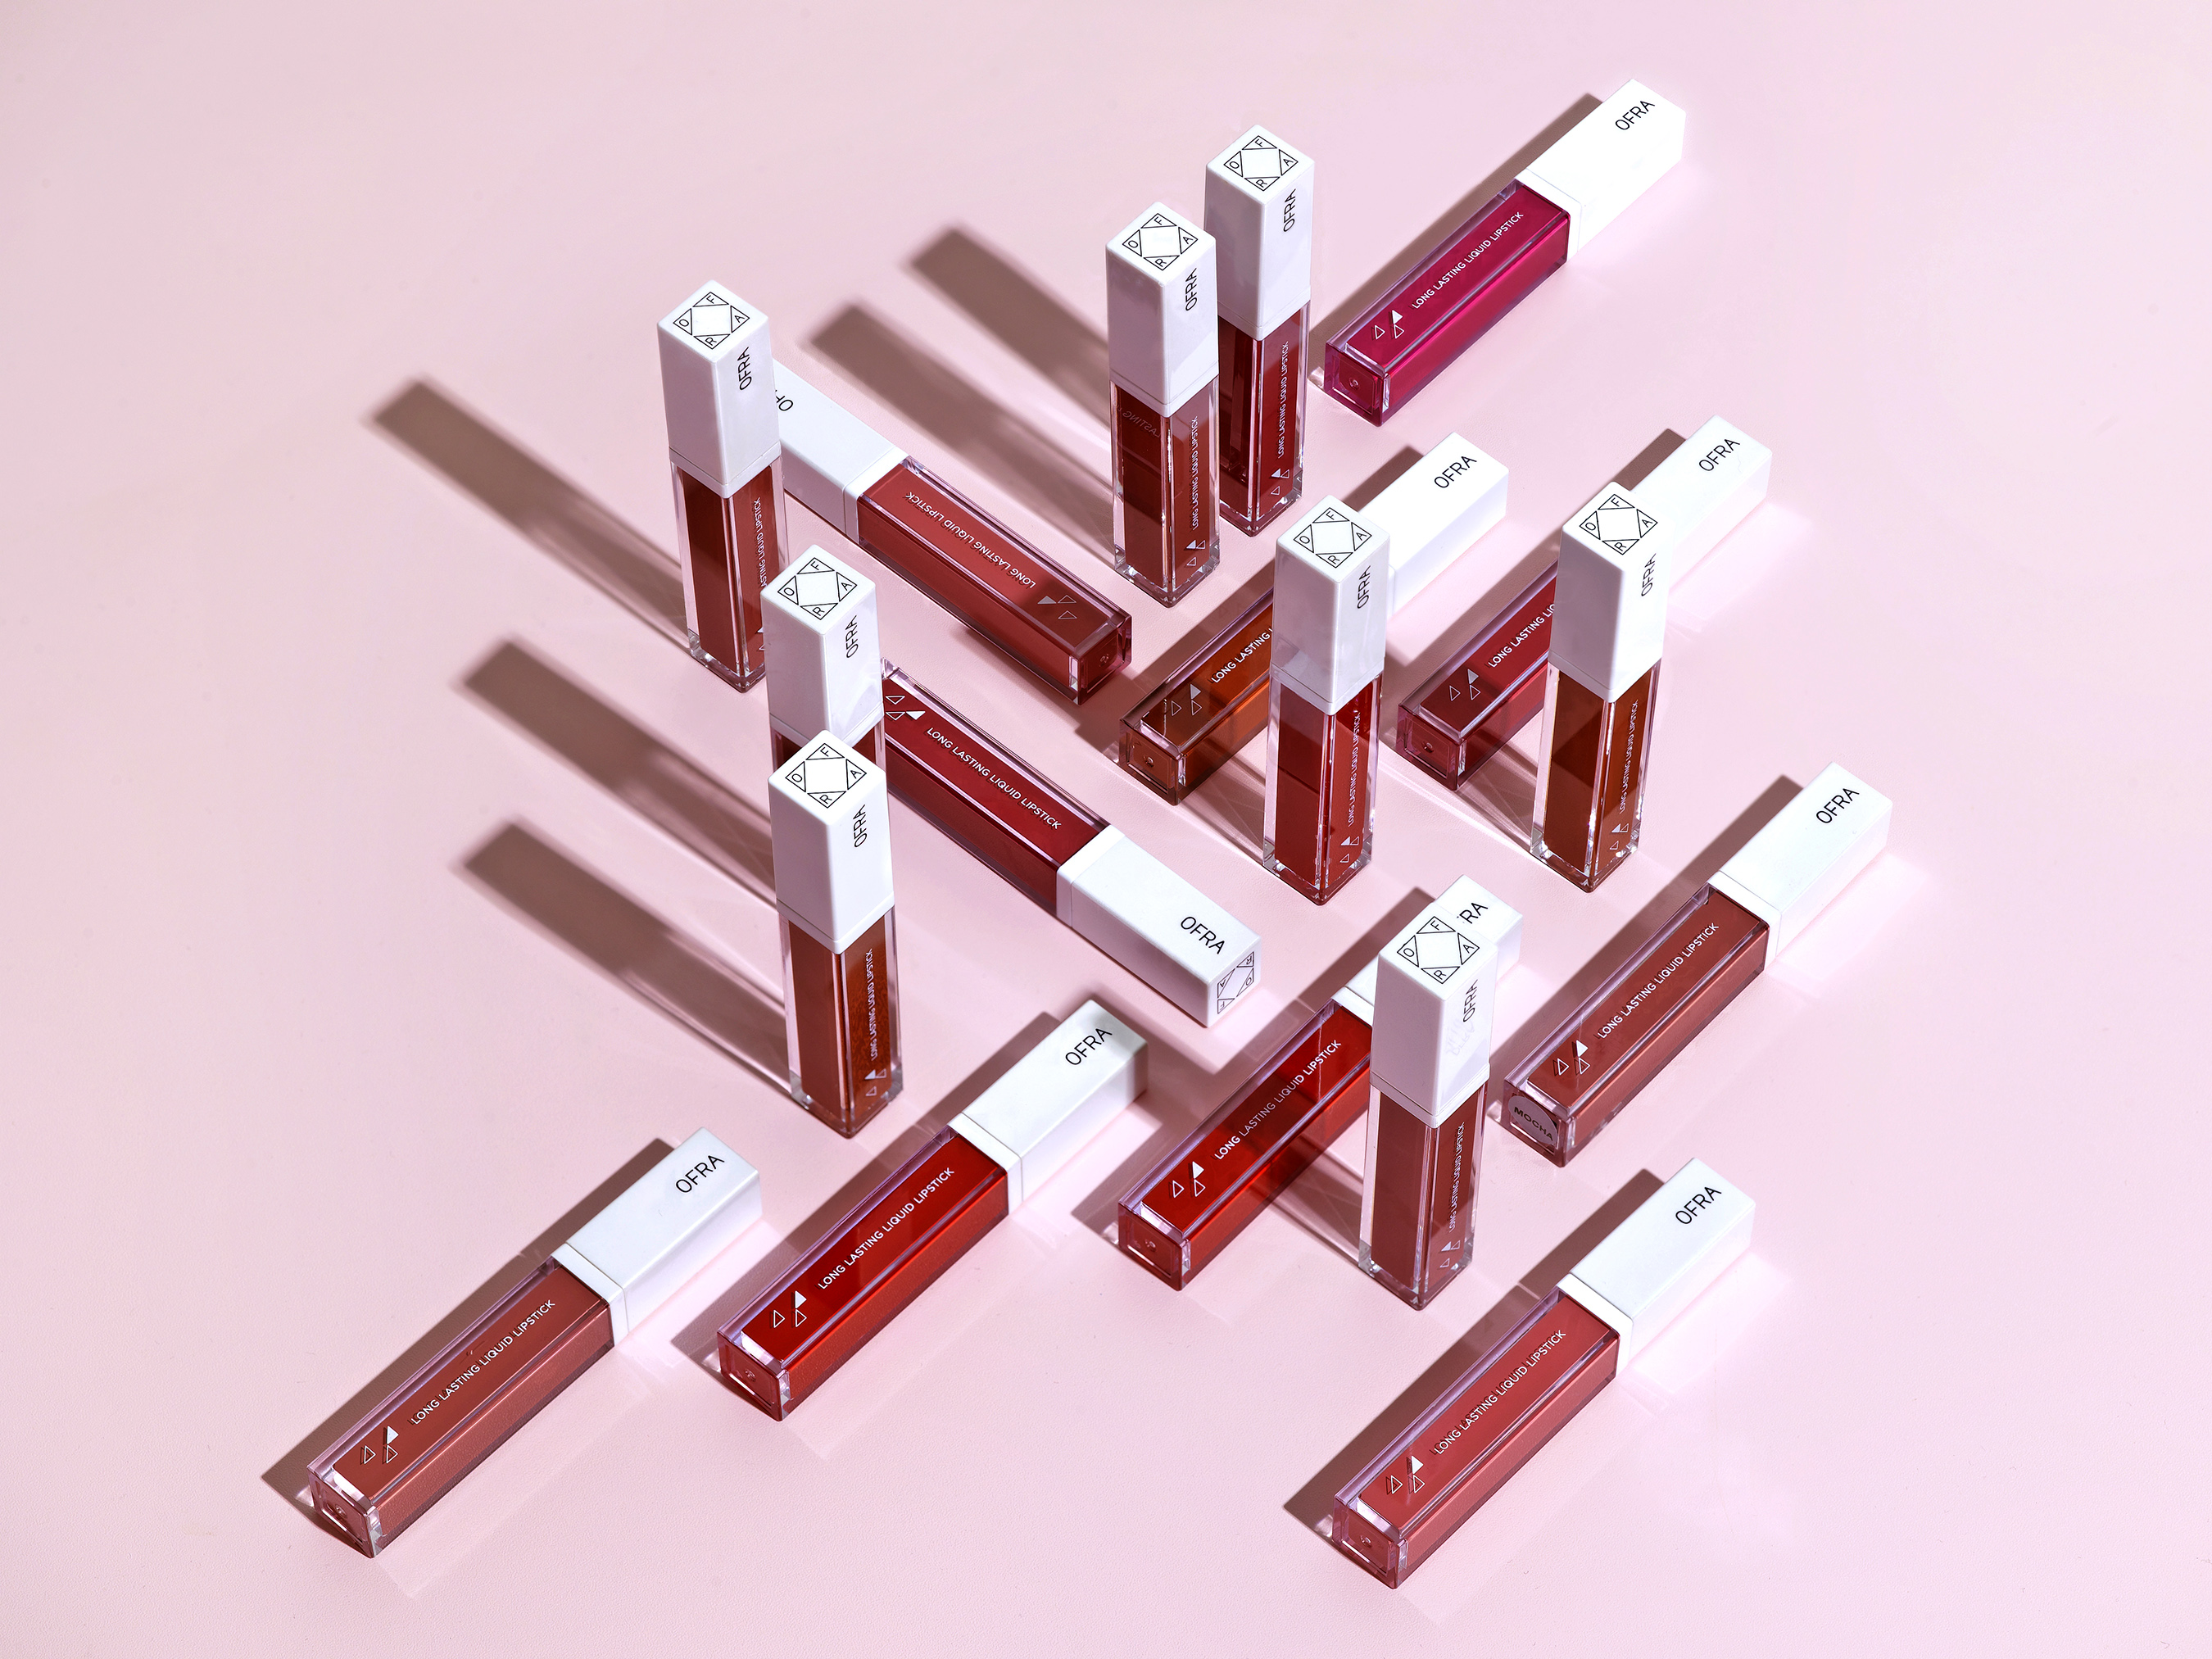 OFRA liquid lipsticks are long-lasting, stay put, and don't dry out your pout